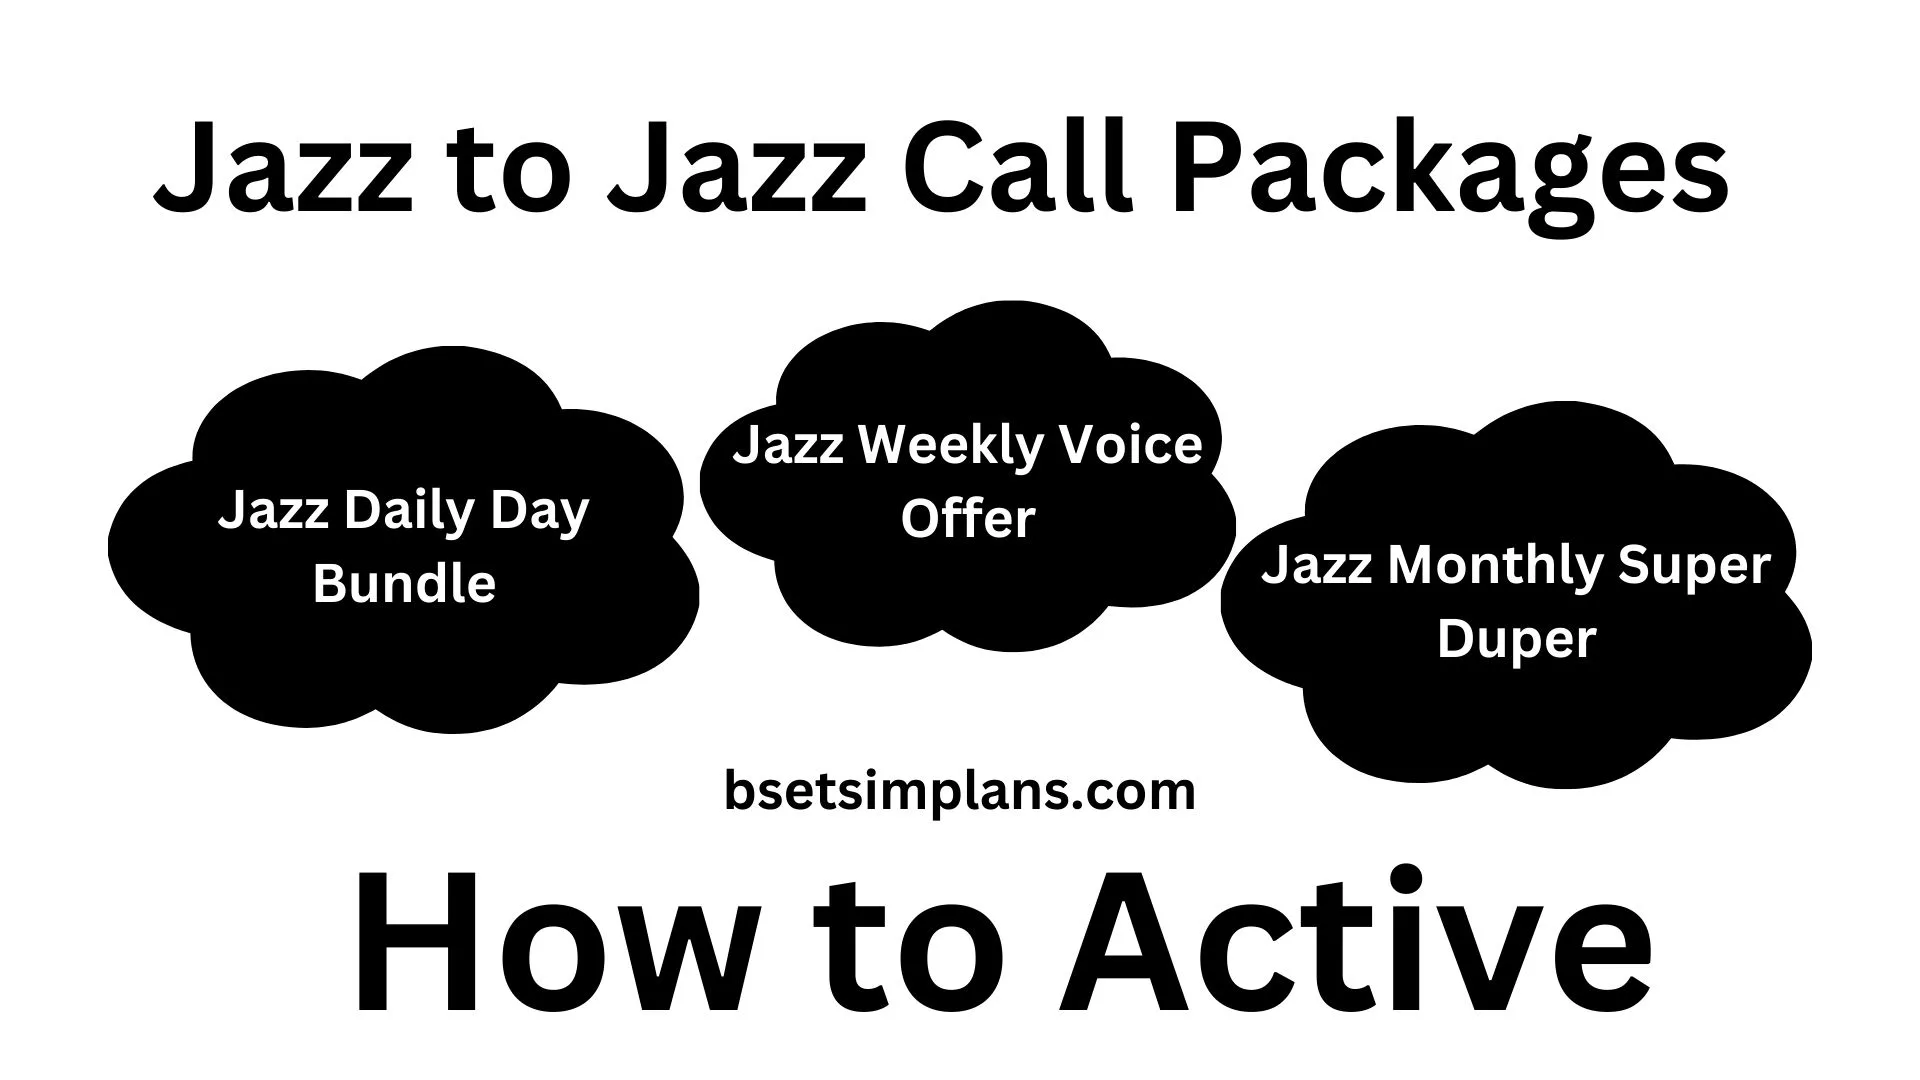 Jazz to Jazz Call Packages